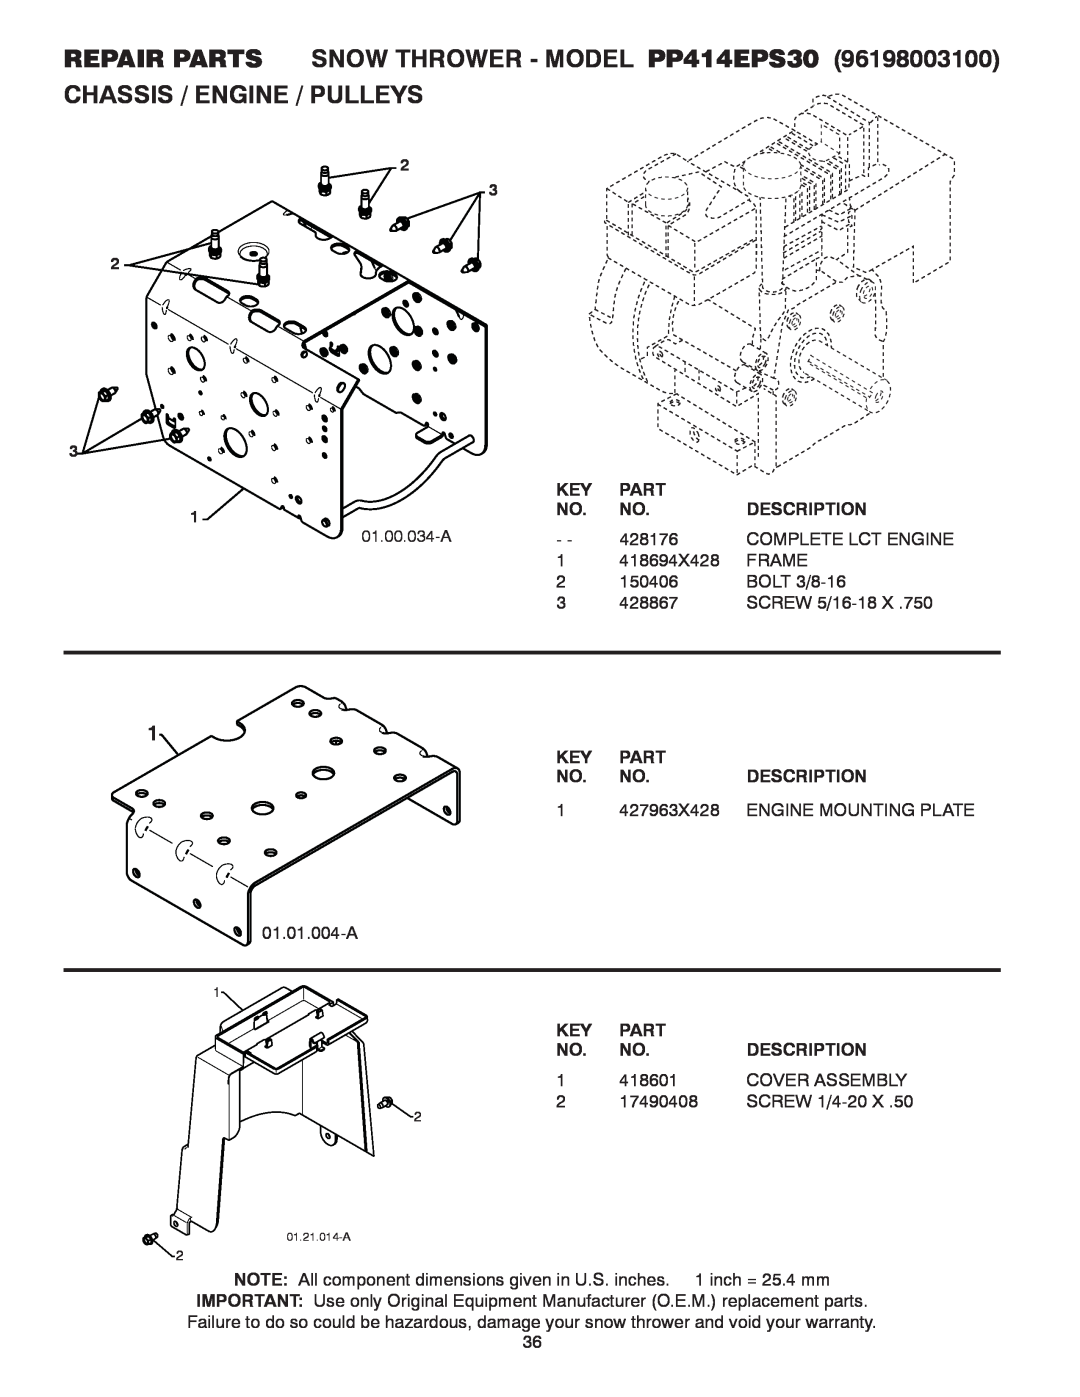 Poulan owner manual Chassis / Engine / Pulleys, REPAIR PARTS SNOW THROWER - MODEL PP414EPS30 